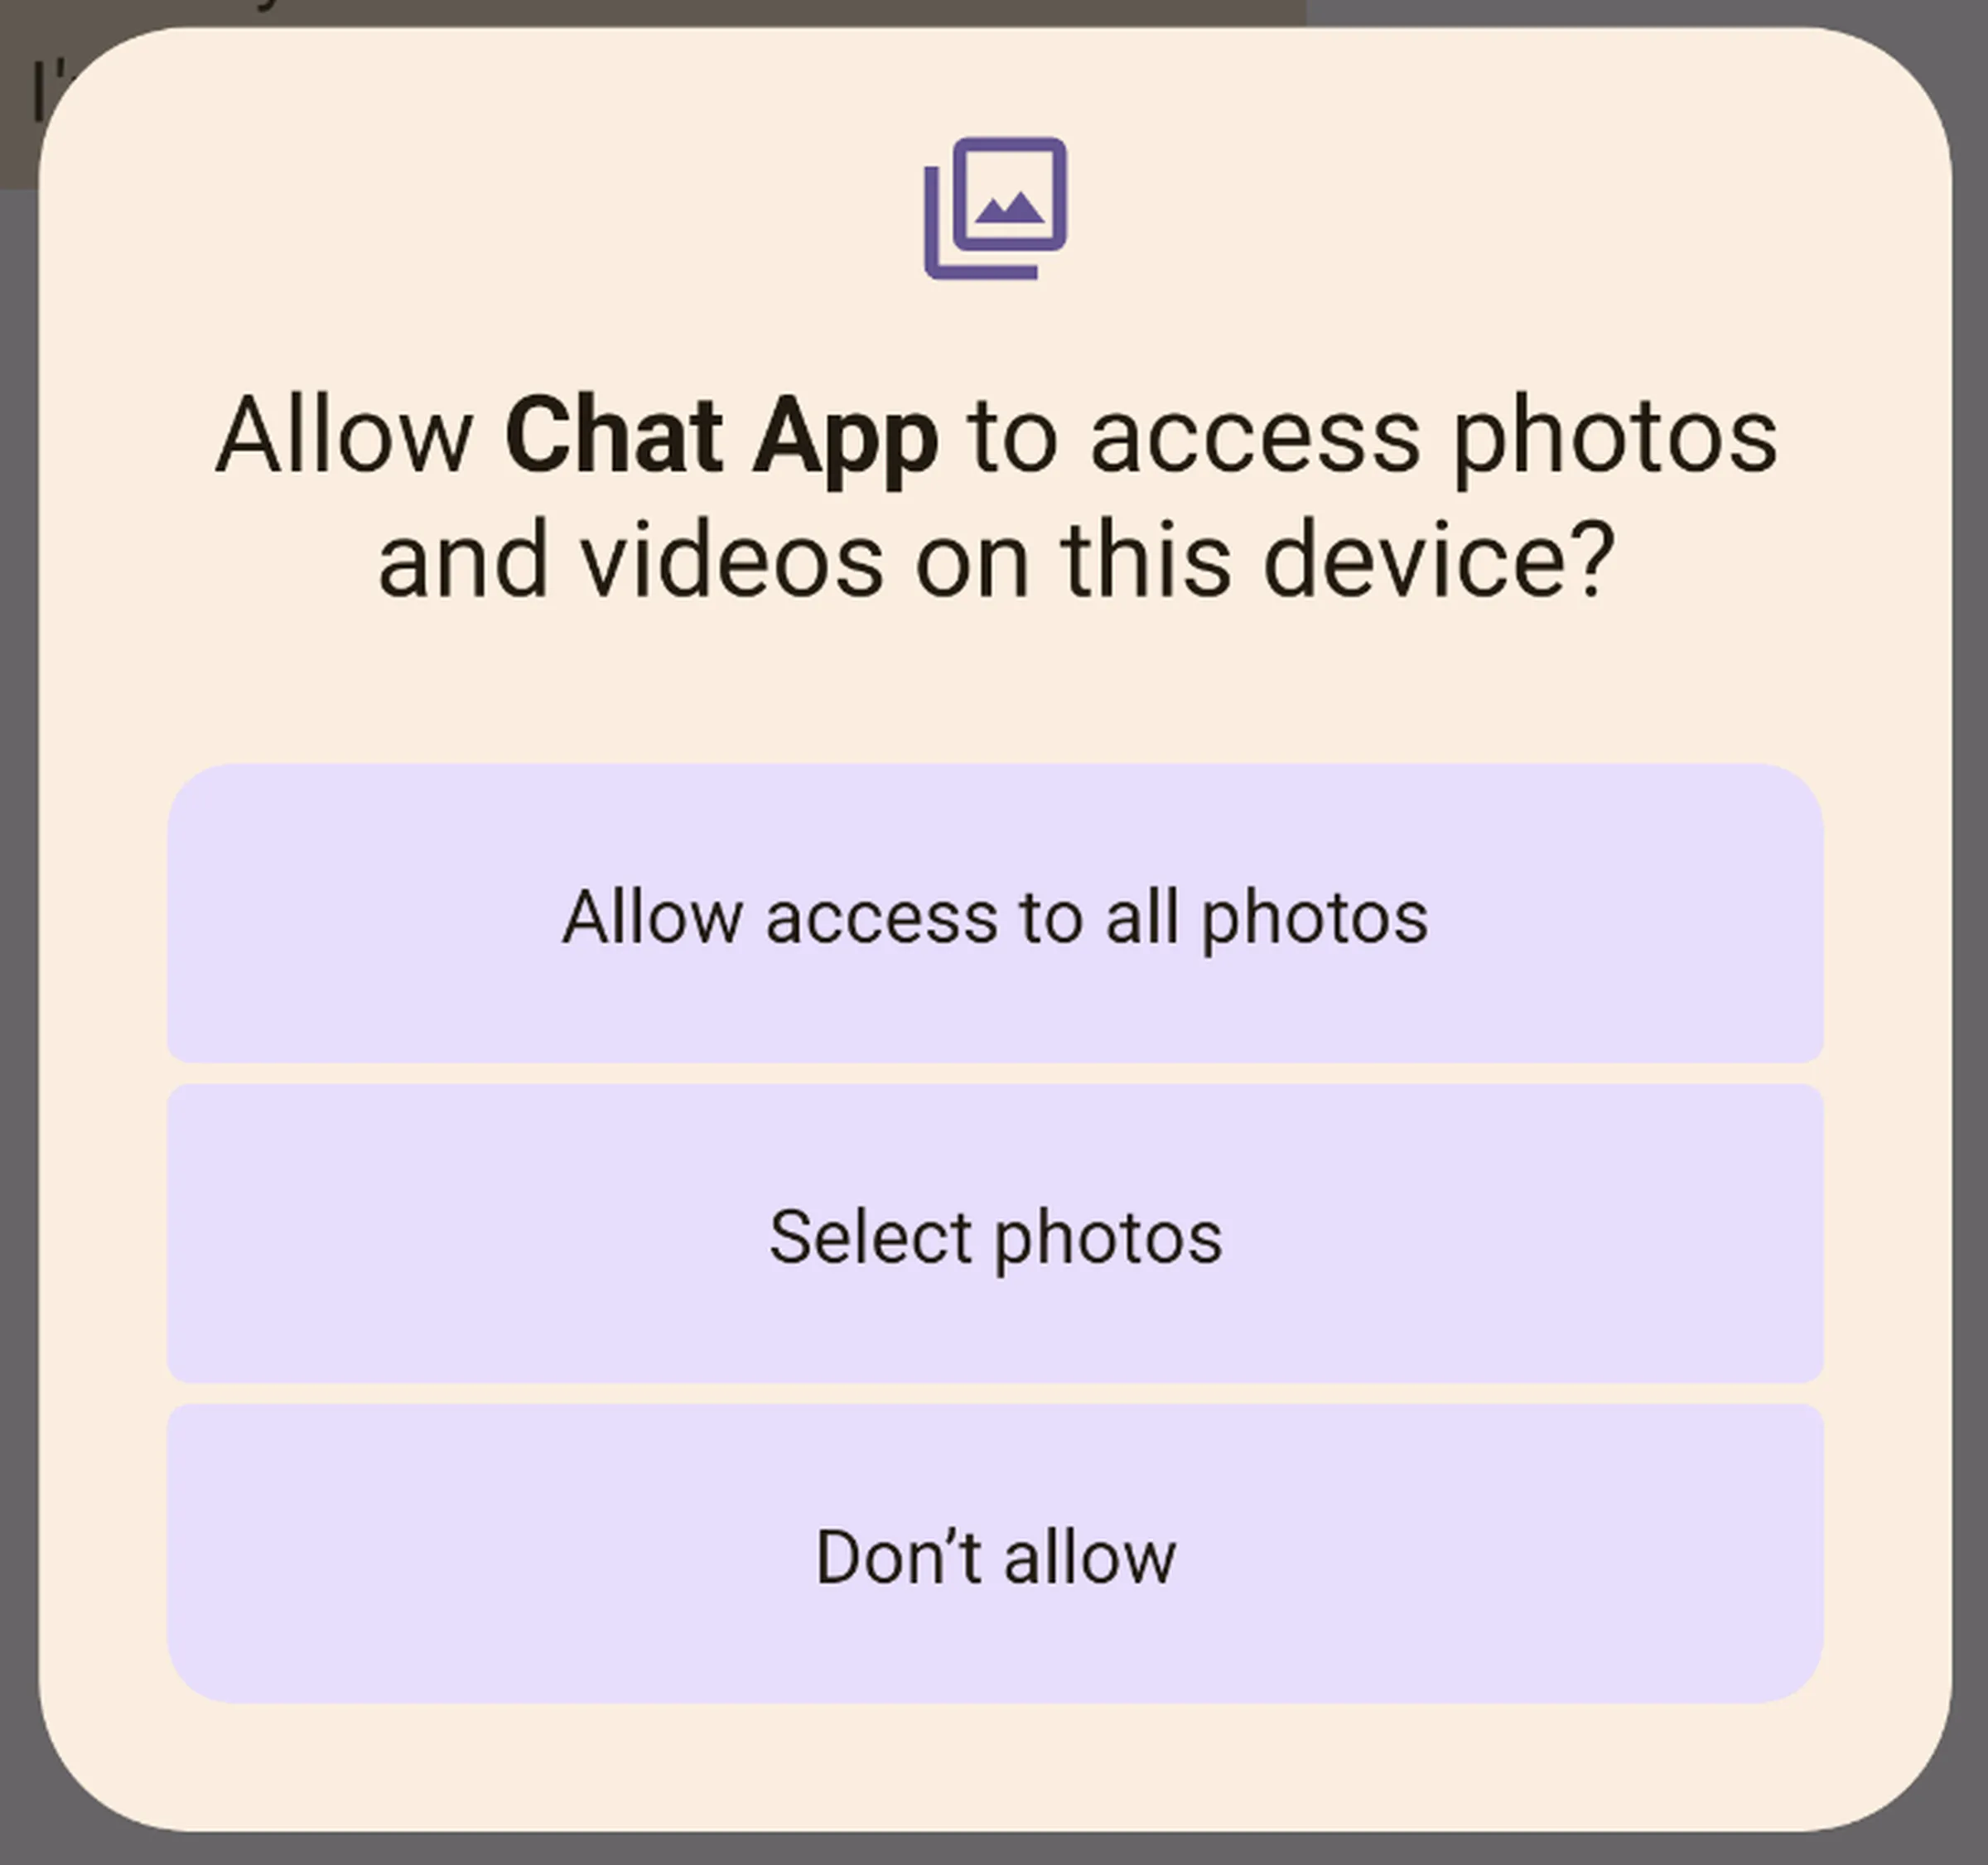 Android 14 image permissions